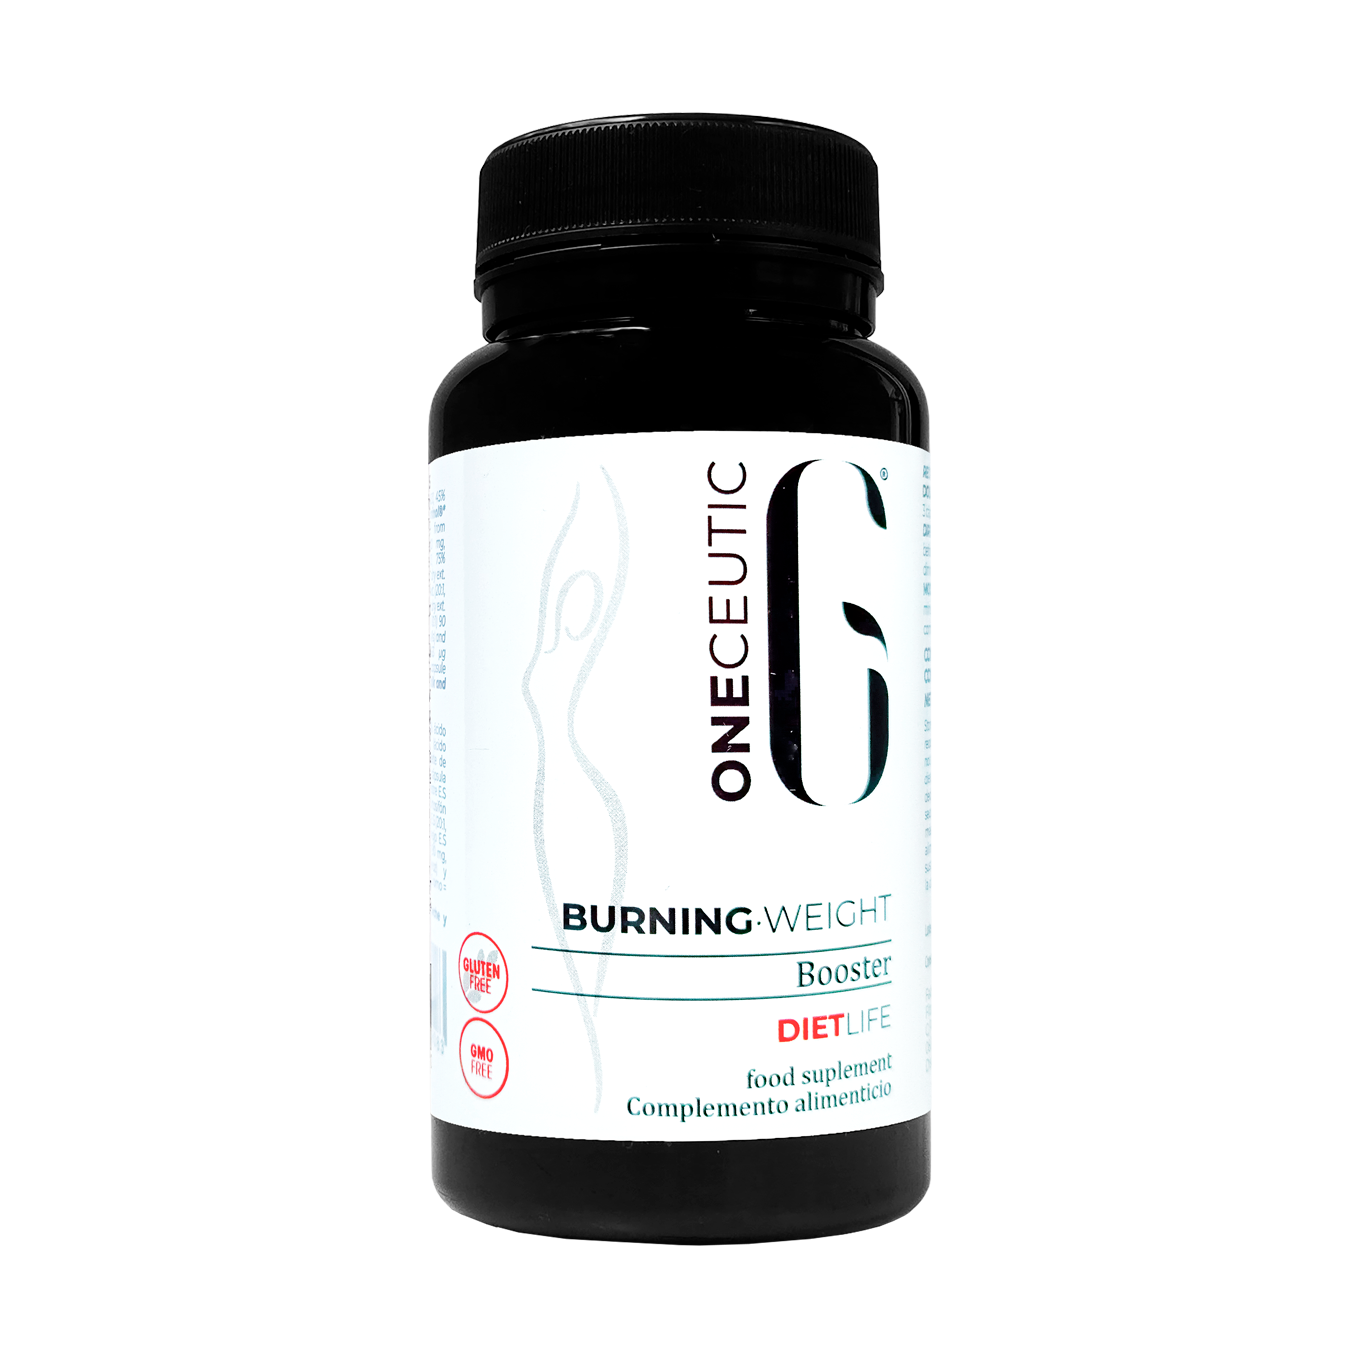 Oneceutic Burning Weight -  DIET LIFE - Booster  Quema grasa